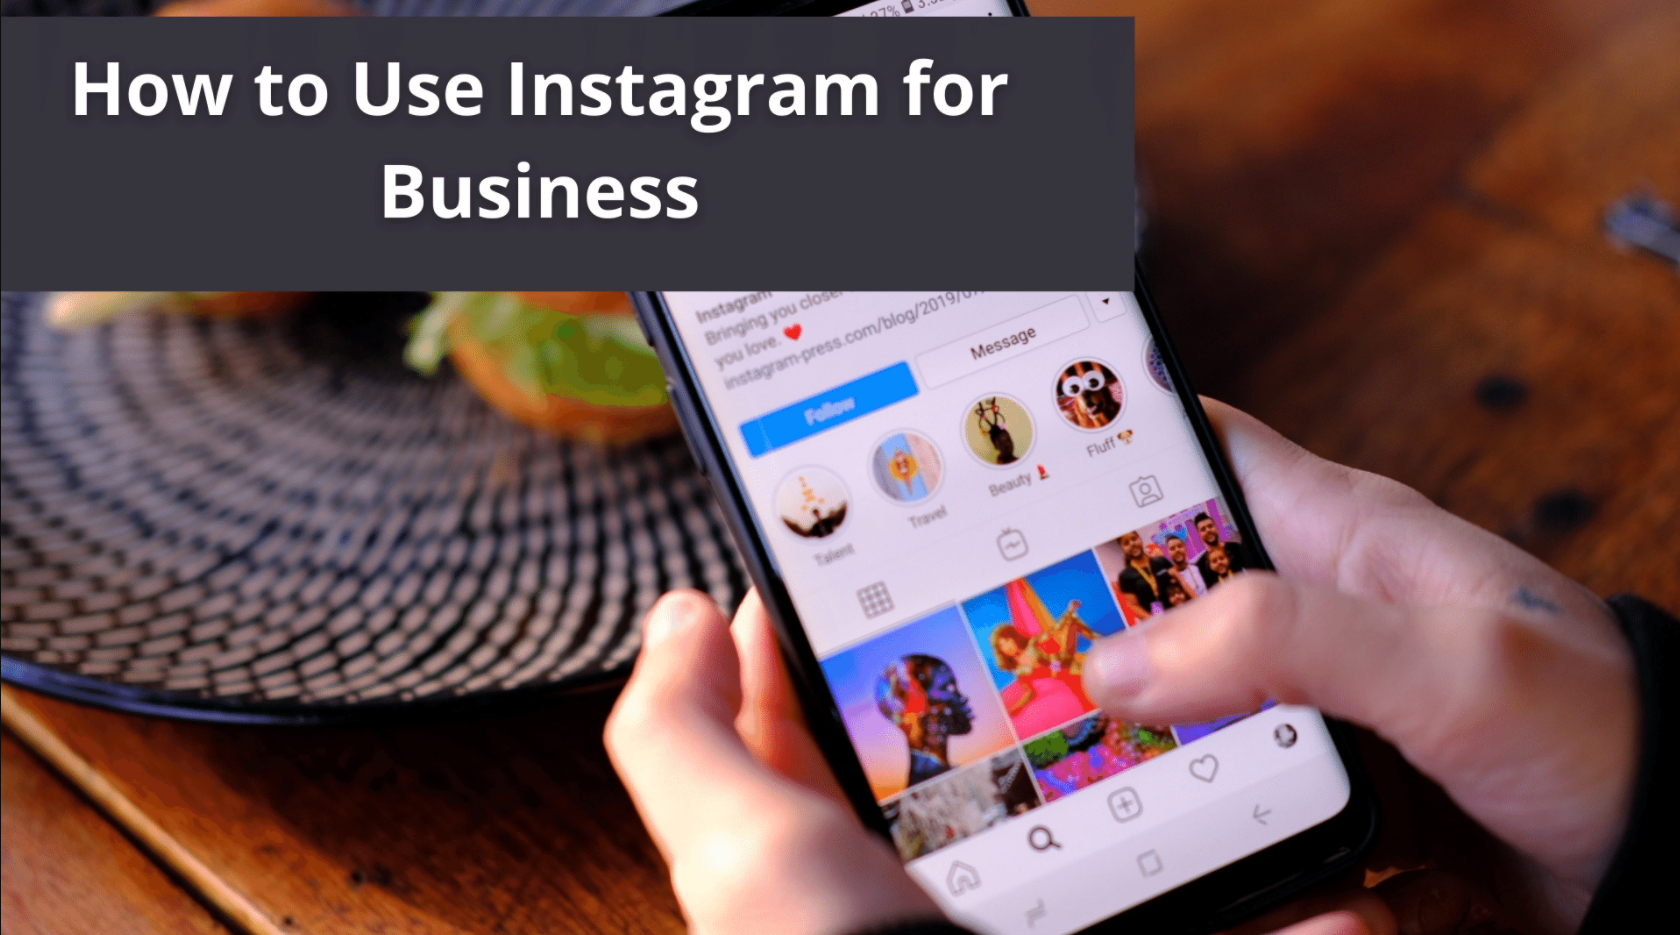 How to Use Instagram for Business? ≡ A Practical Step-by-Step Guide